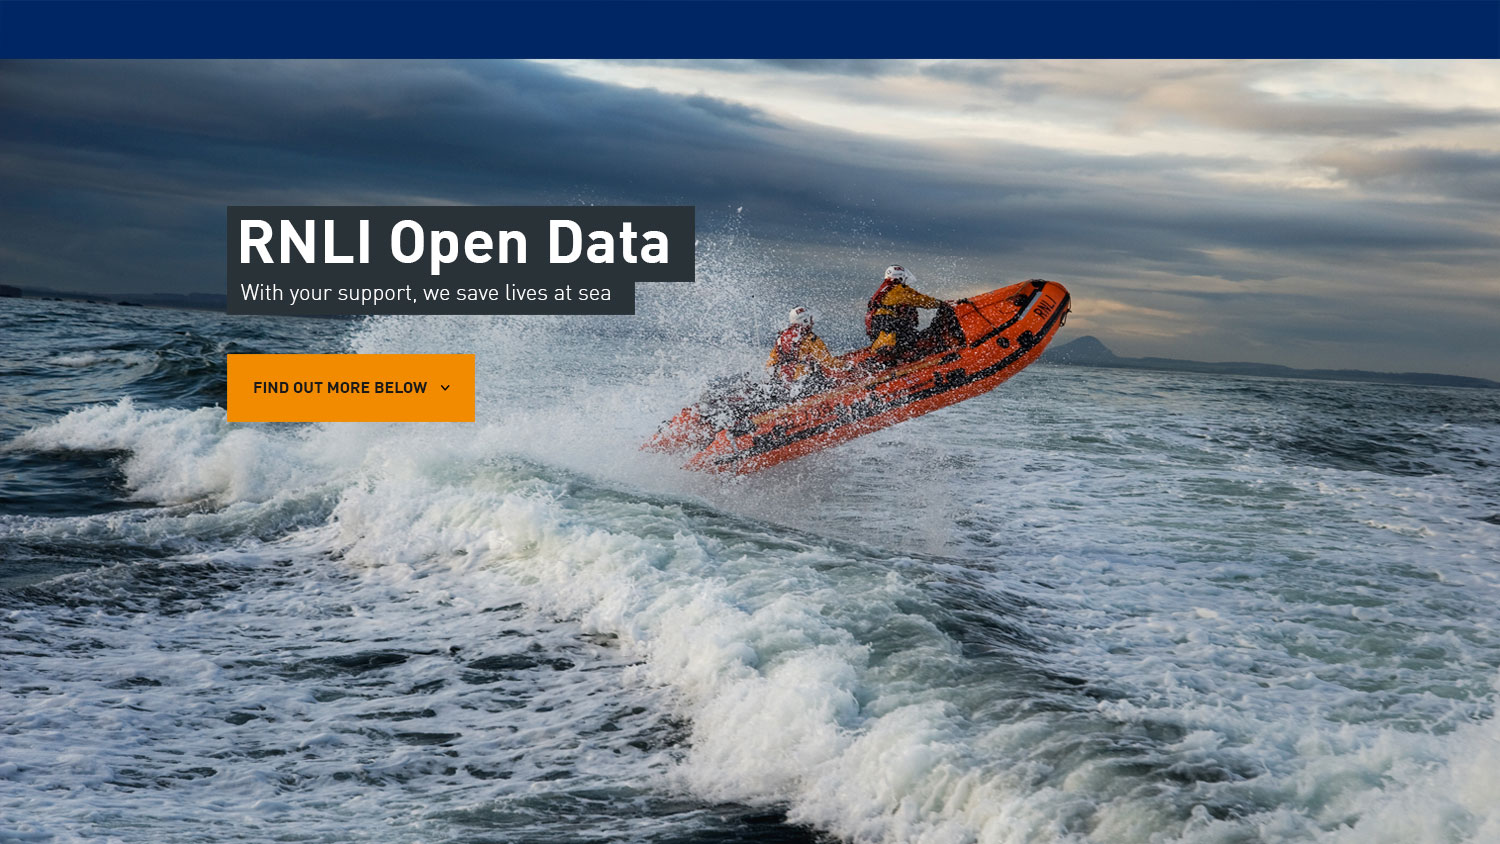  rnli's open data home page 